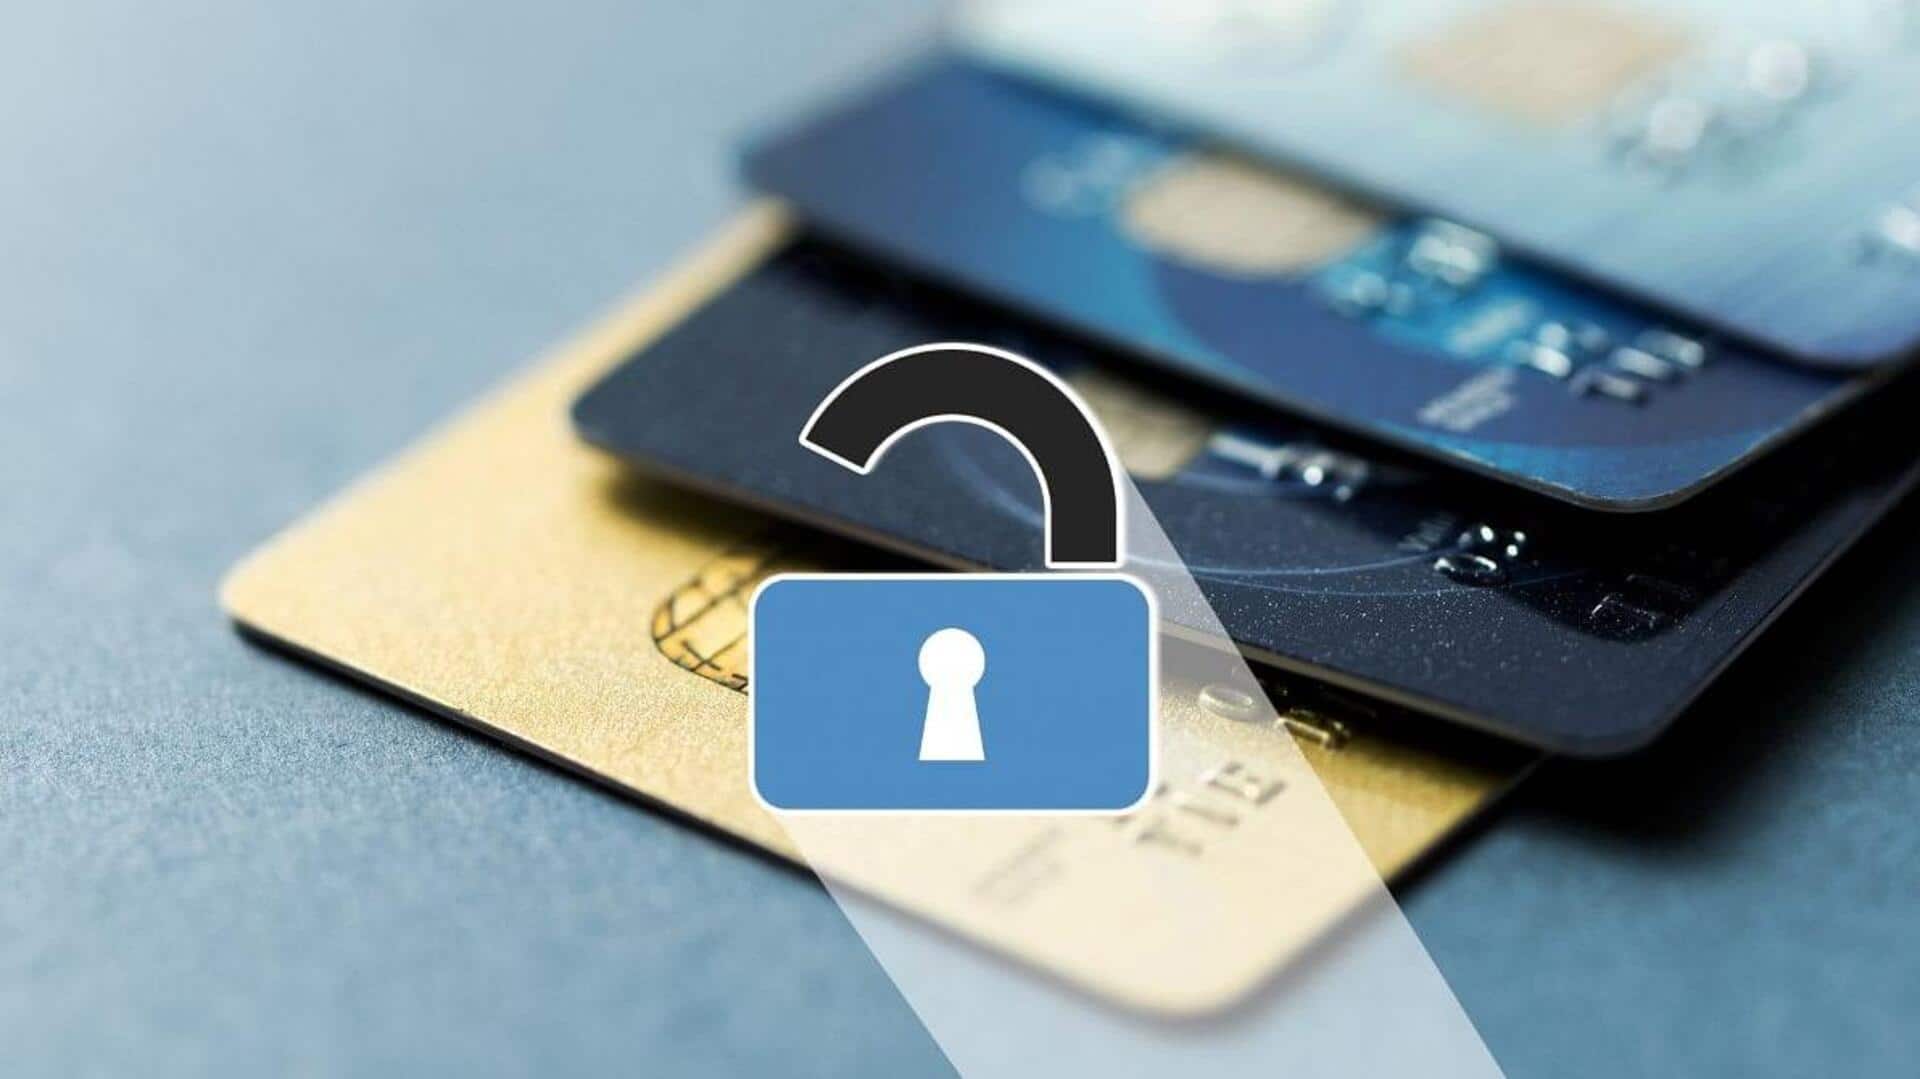 RBI proposes card-on-file tokenization for enhanced security: What it means